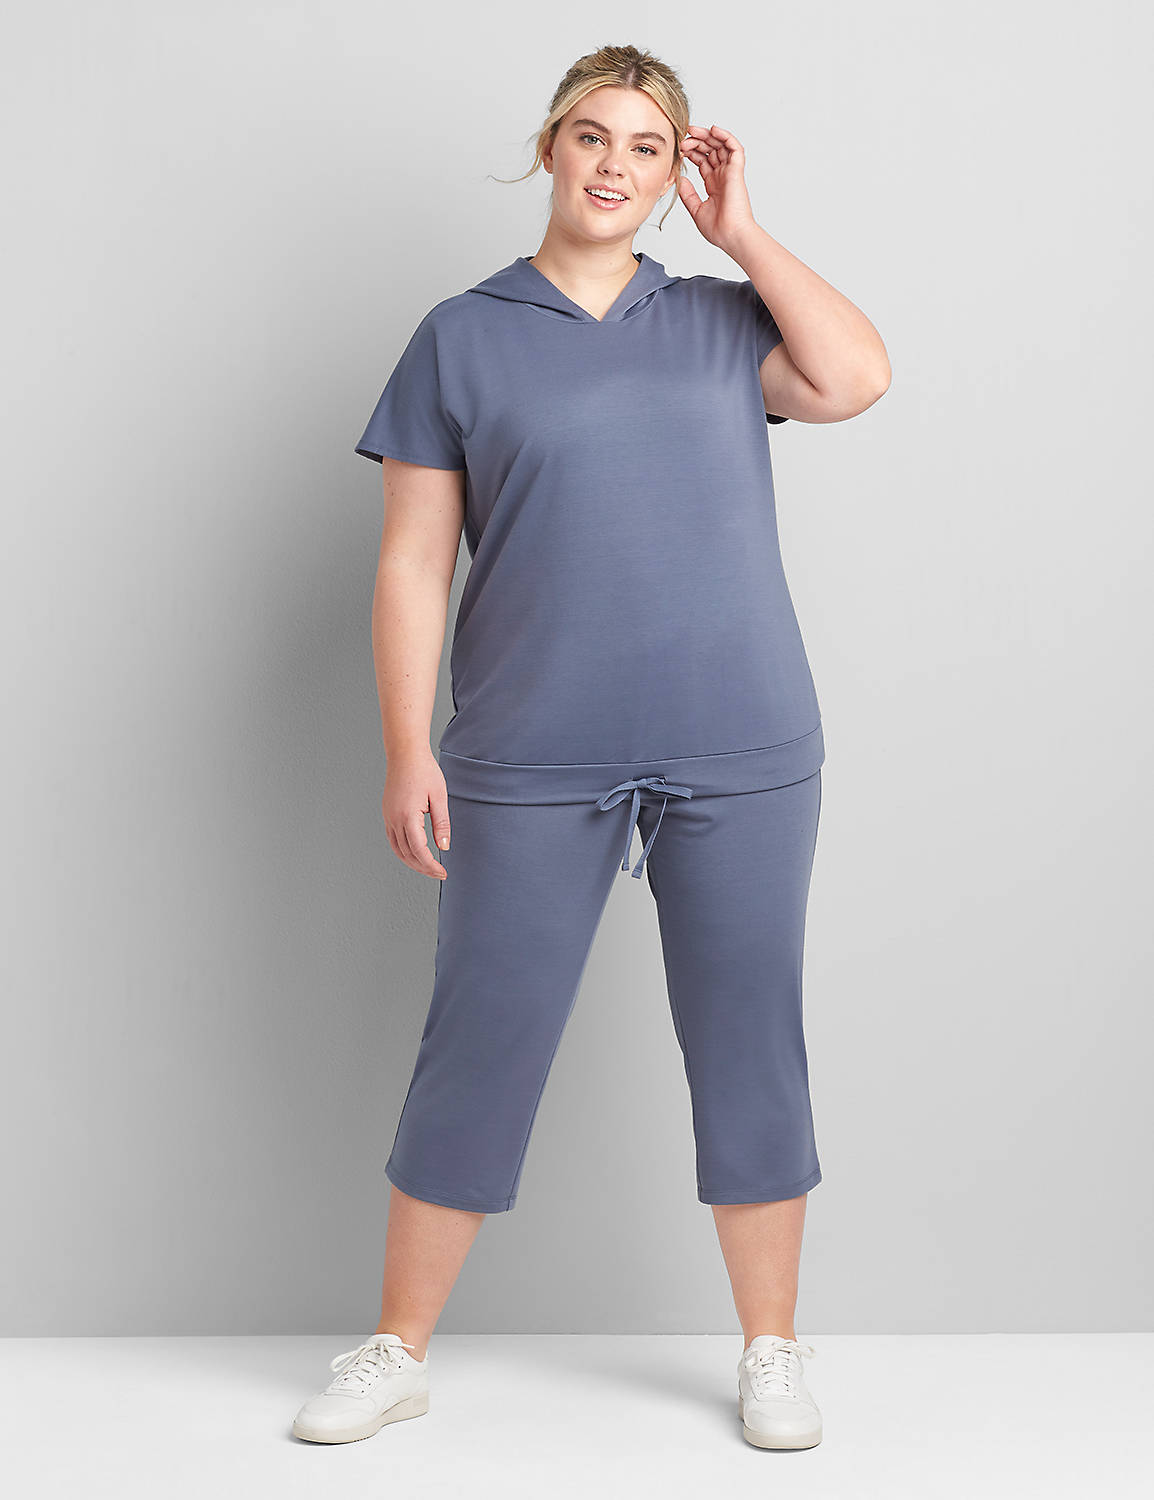 LIVI French Terry Crop Straight Pant Product Image 3